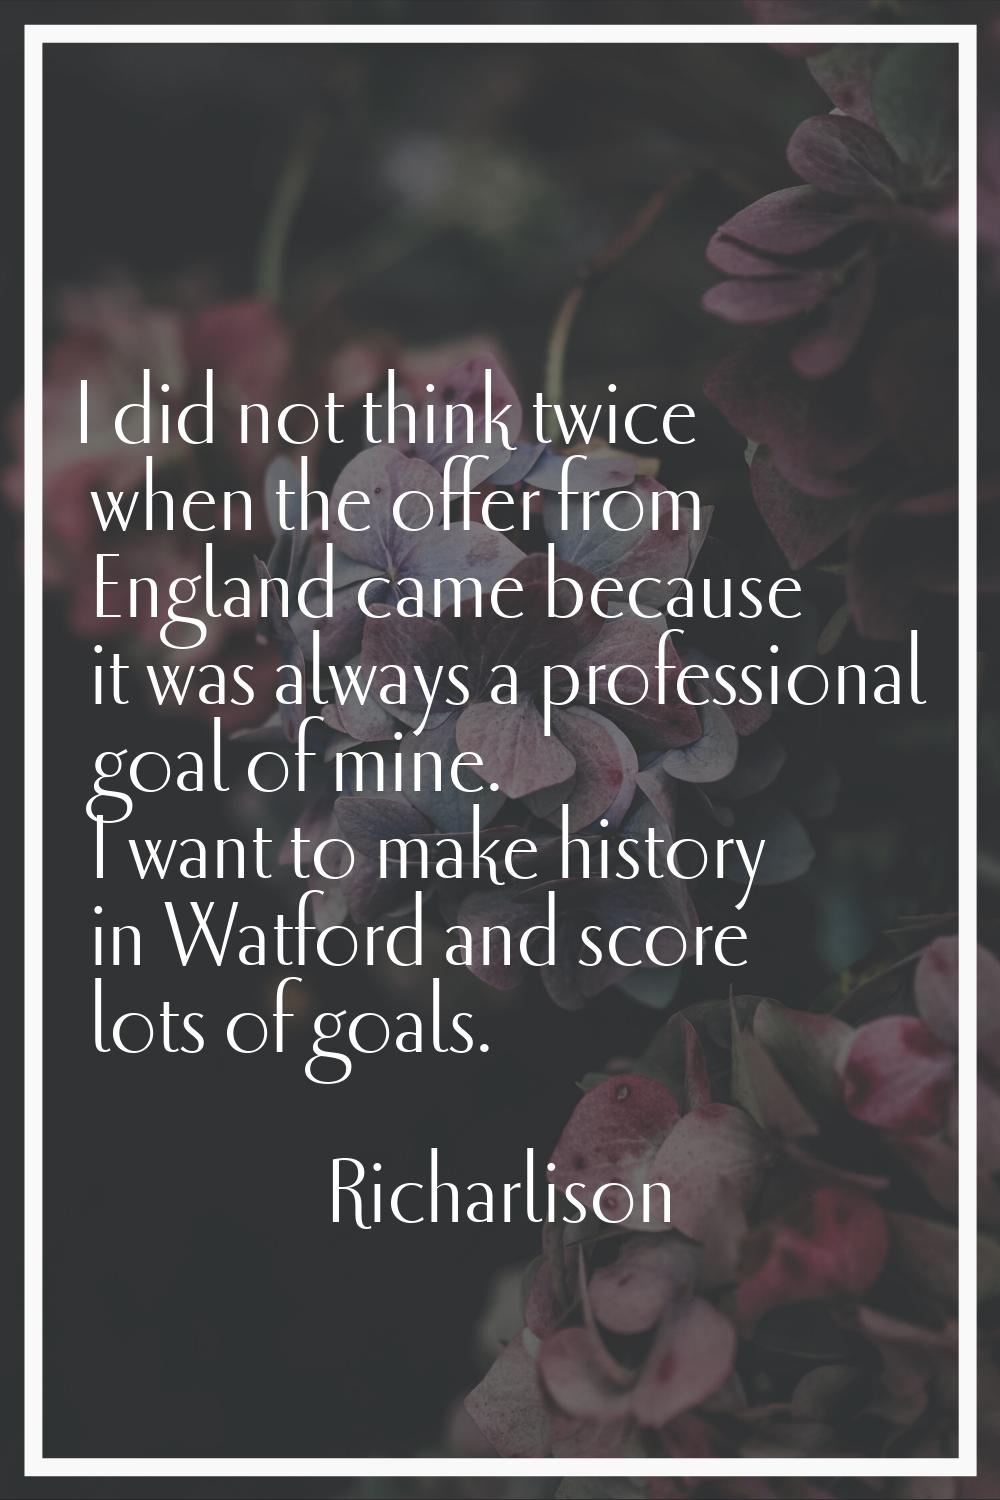 I did not think twice when the offer from England came because it was always a professional goal of